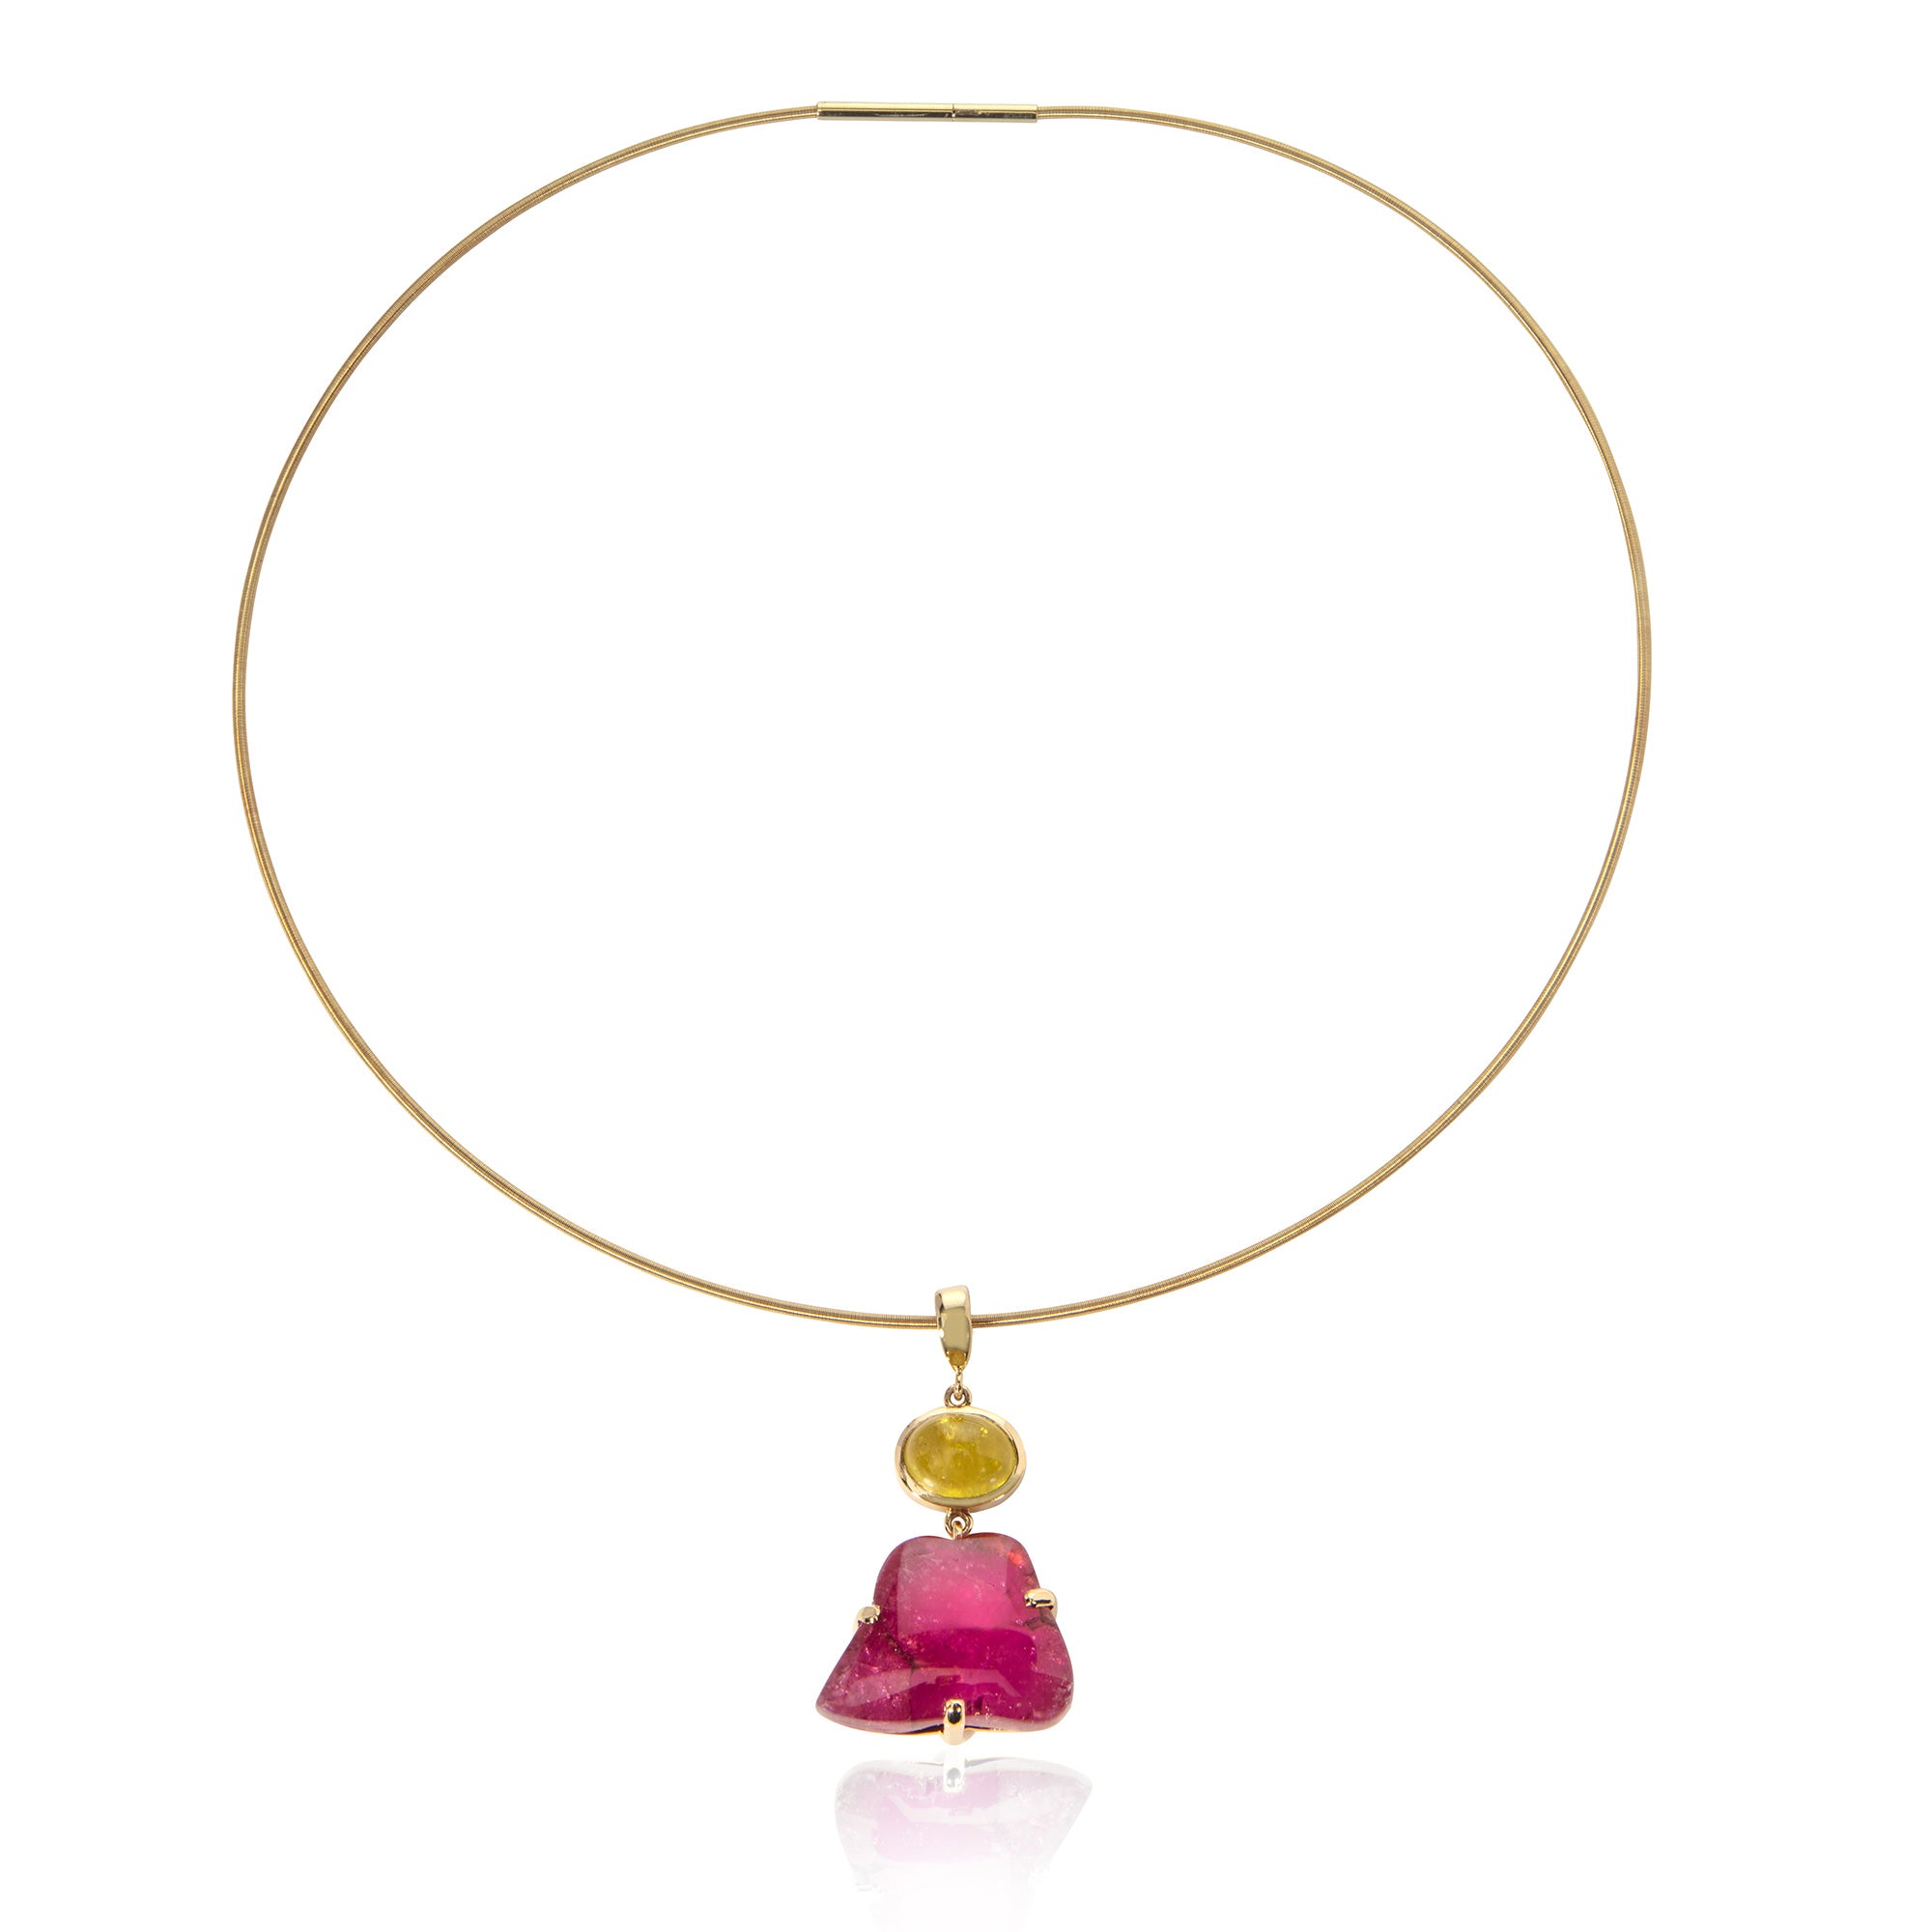 Pendant of pink irregular shaped tourmaline cabochon with yellow tourmaline hung on gold torque on white background